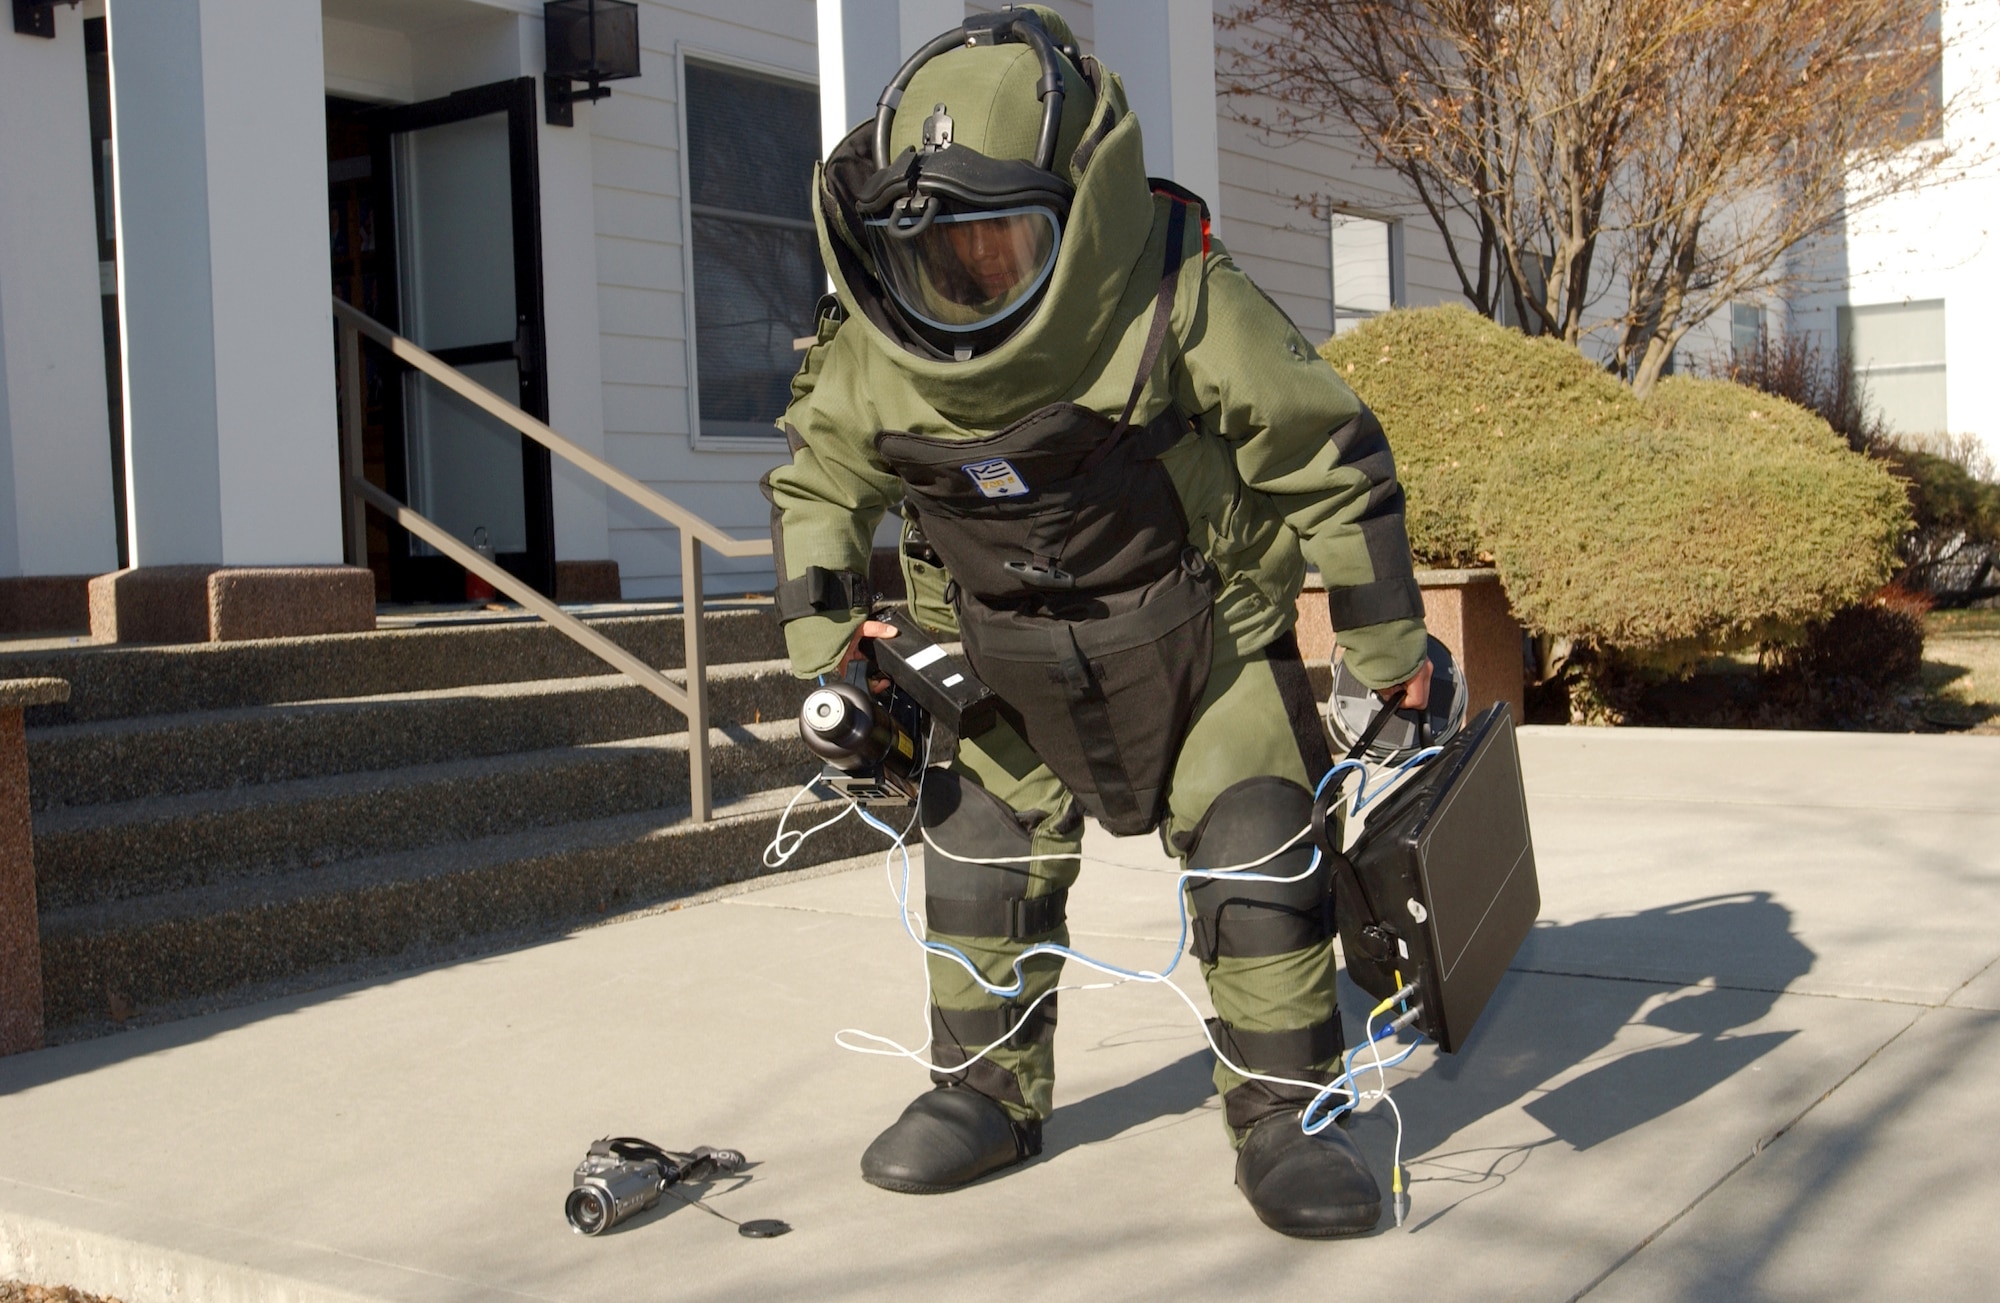 FAIRCHILD AIR FORCE BASE, Wash. (AFPN) -- Senior Airman Sarah Martinez prepares to enter a building where a simulated suspect device was found during an exercise here March 9.  Airman Martinez is an explosive ordnance disposal technician with the base's 92nd Civil Engineer Squadron.  (U.S. Air Force photo by Staff Sgt. Laura K. Smith)